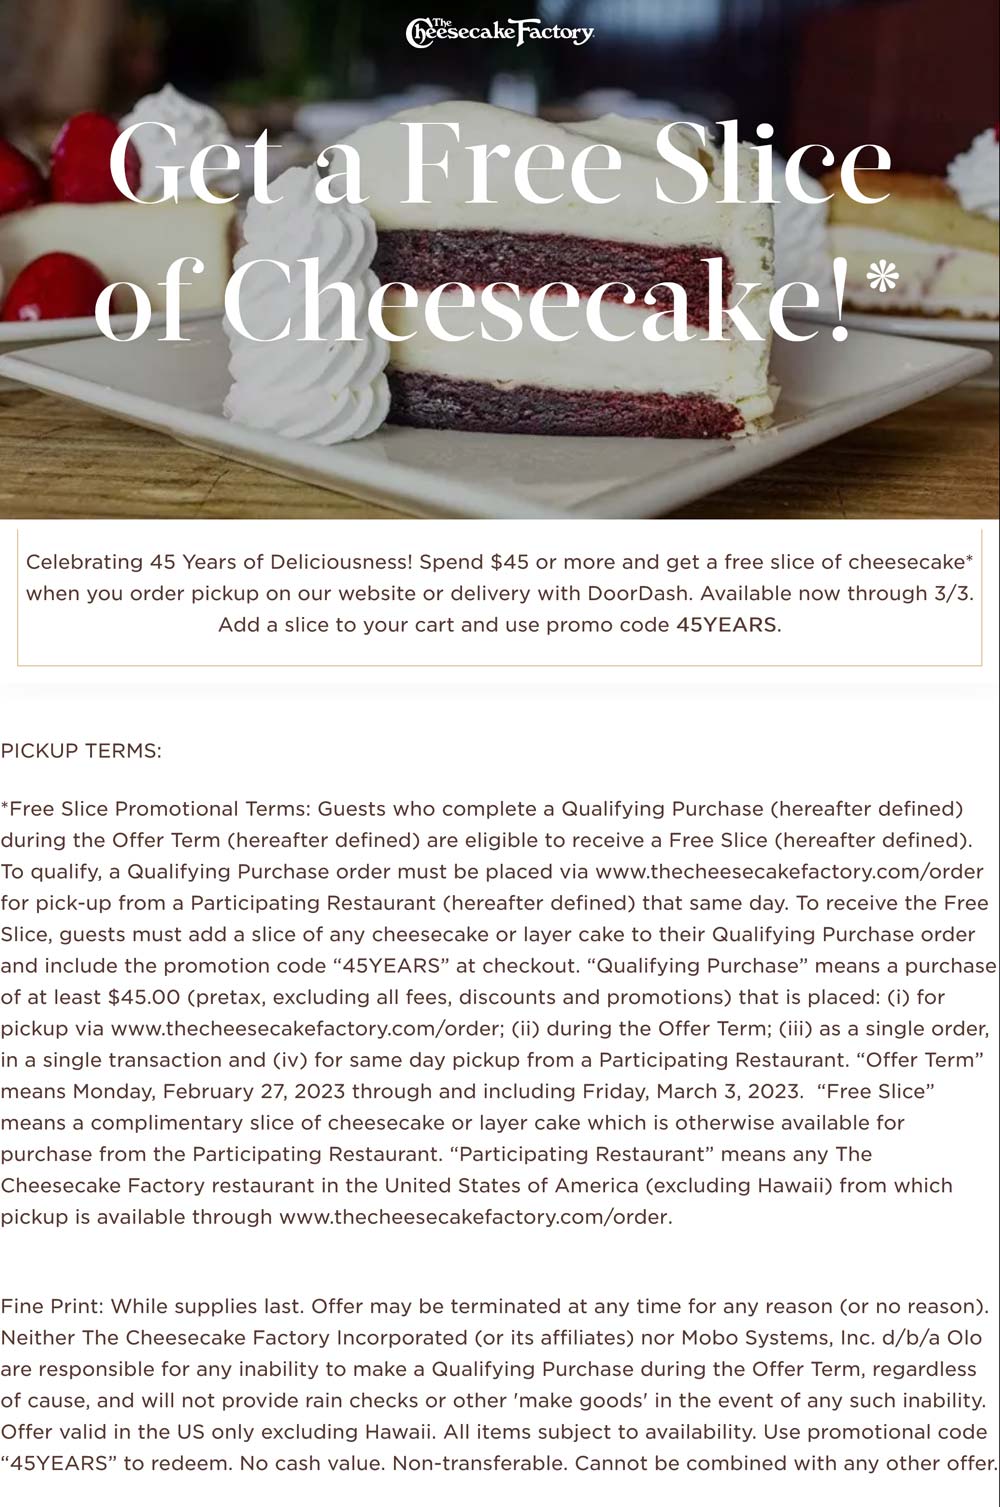 The Cheesecake Factory restaurants Coupon  Free slice of cheesecake via takeout or delivery at The Cheesecake Factory via promo code 45YEARS #thecheesecakefactory 